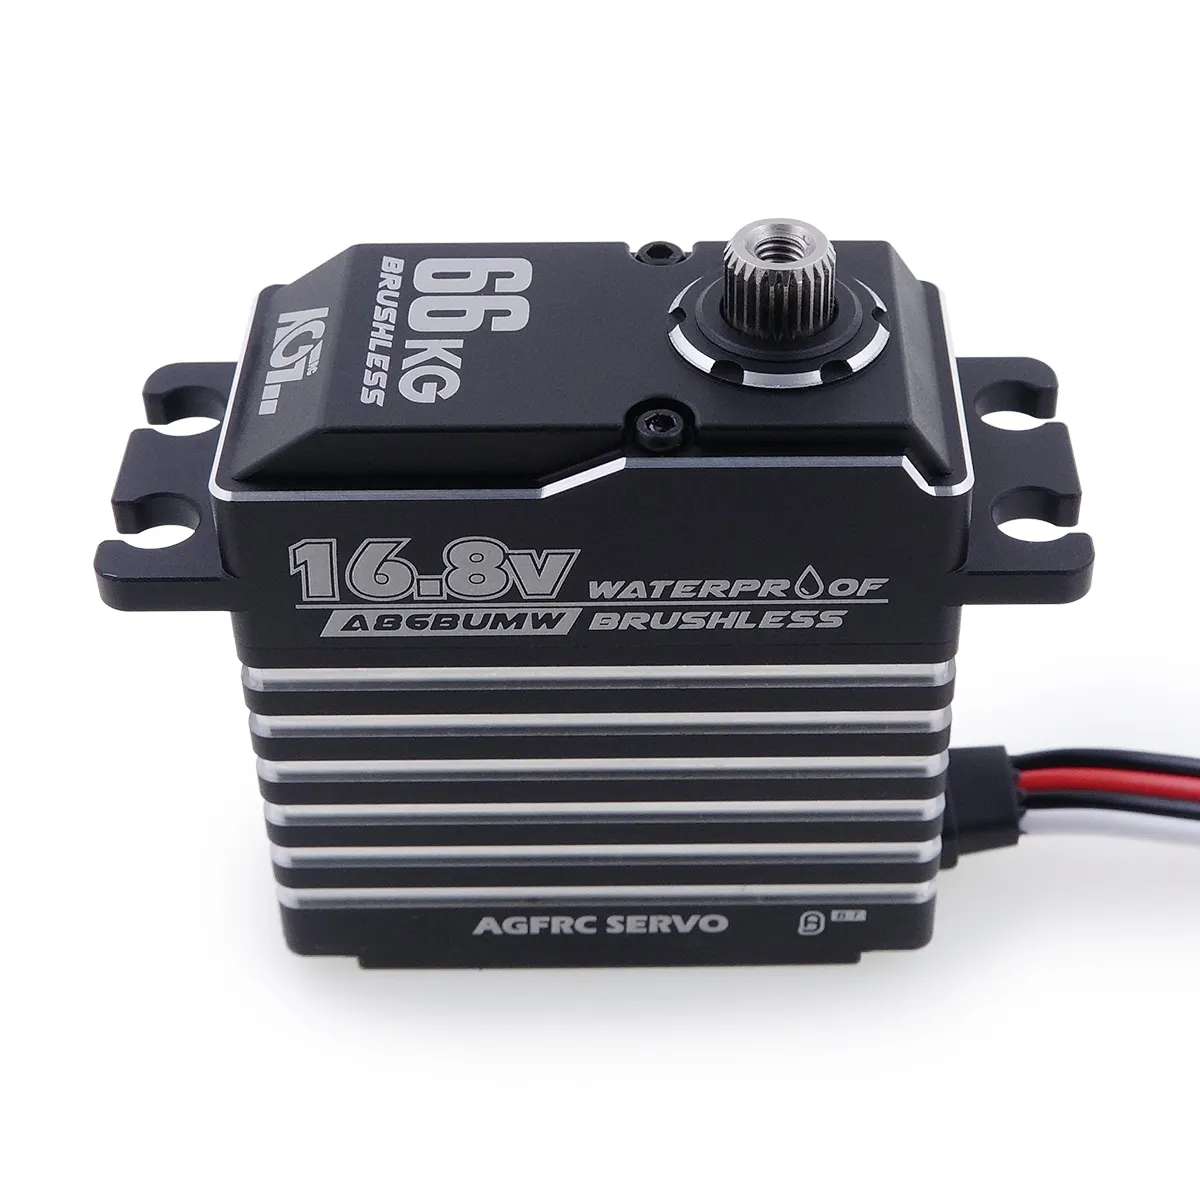 AGFRC A86BUMW 16.8V 66KG Magnetic Waterproof 4S Brushless Monster Torque Servo for 1/8 RC Car Crawler Buggy